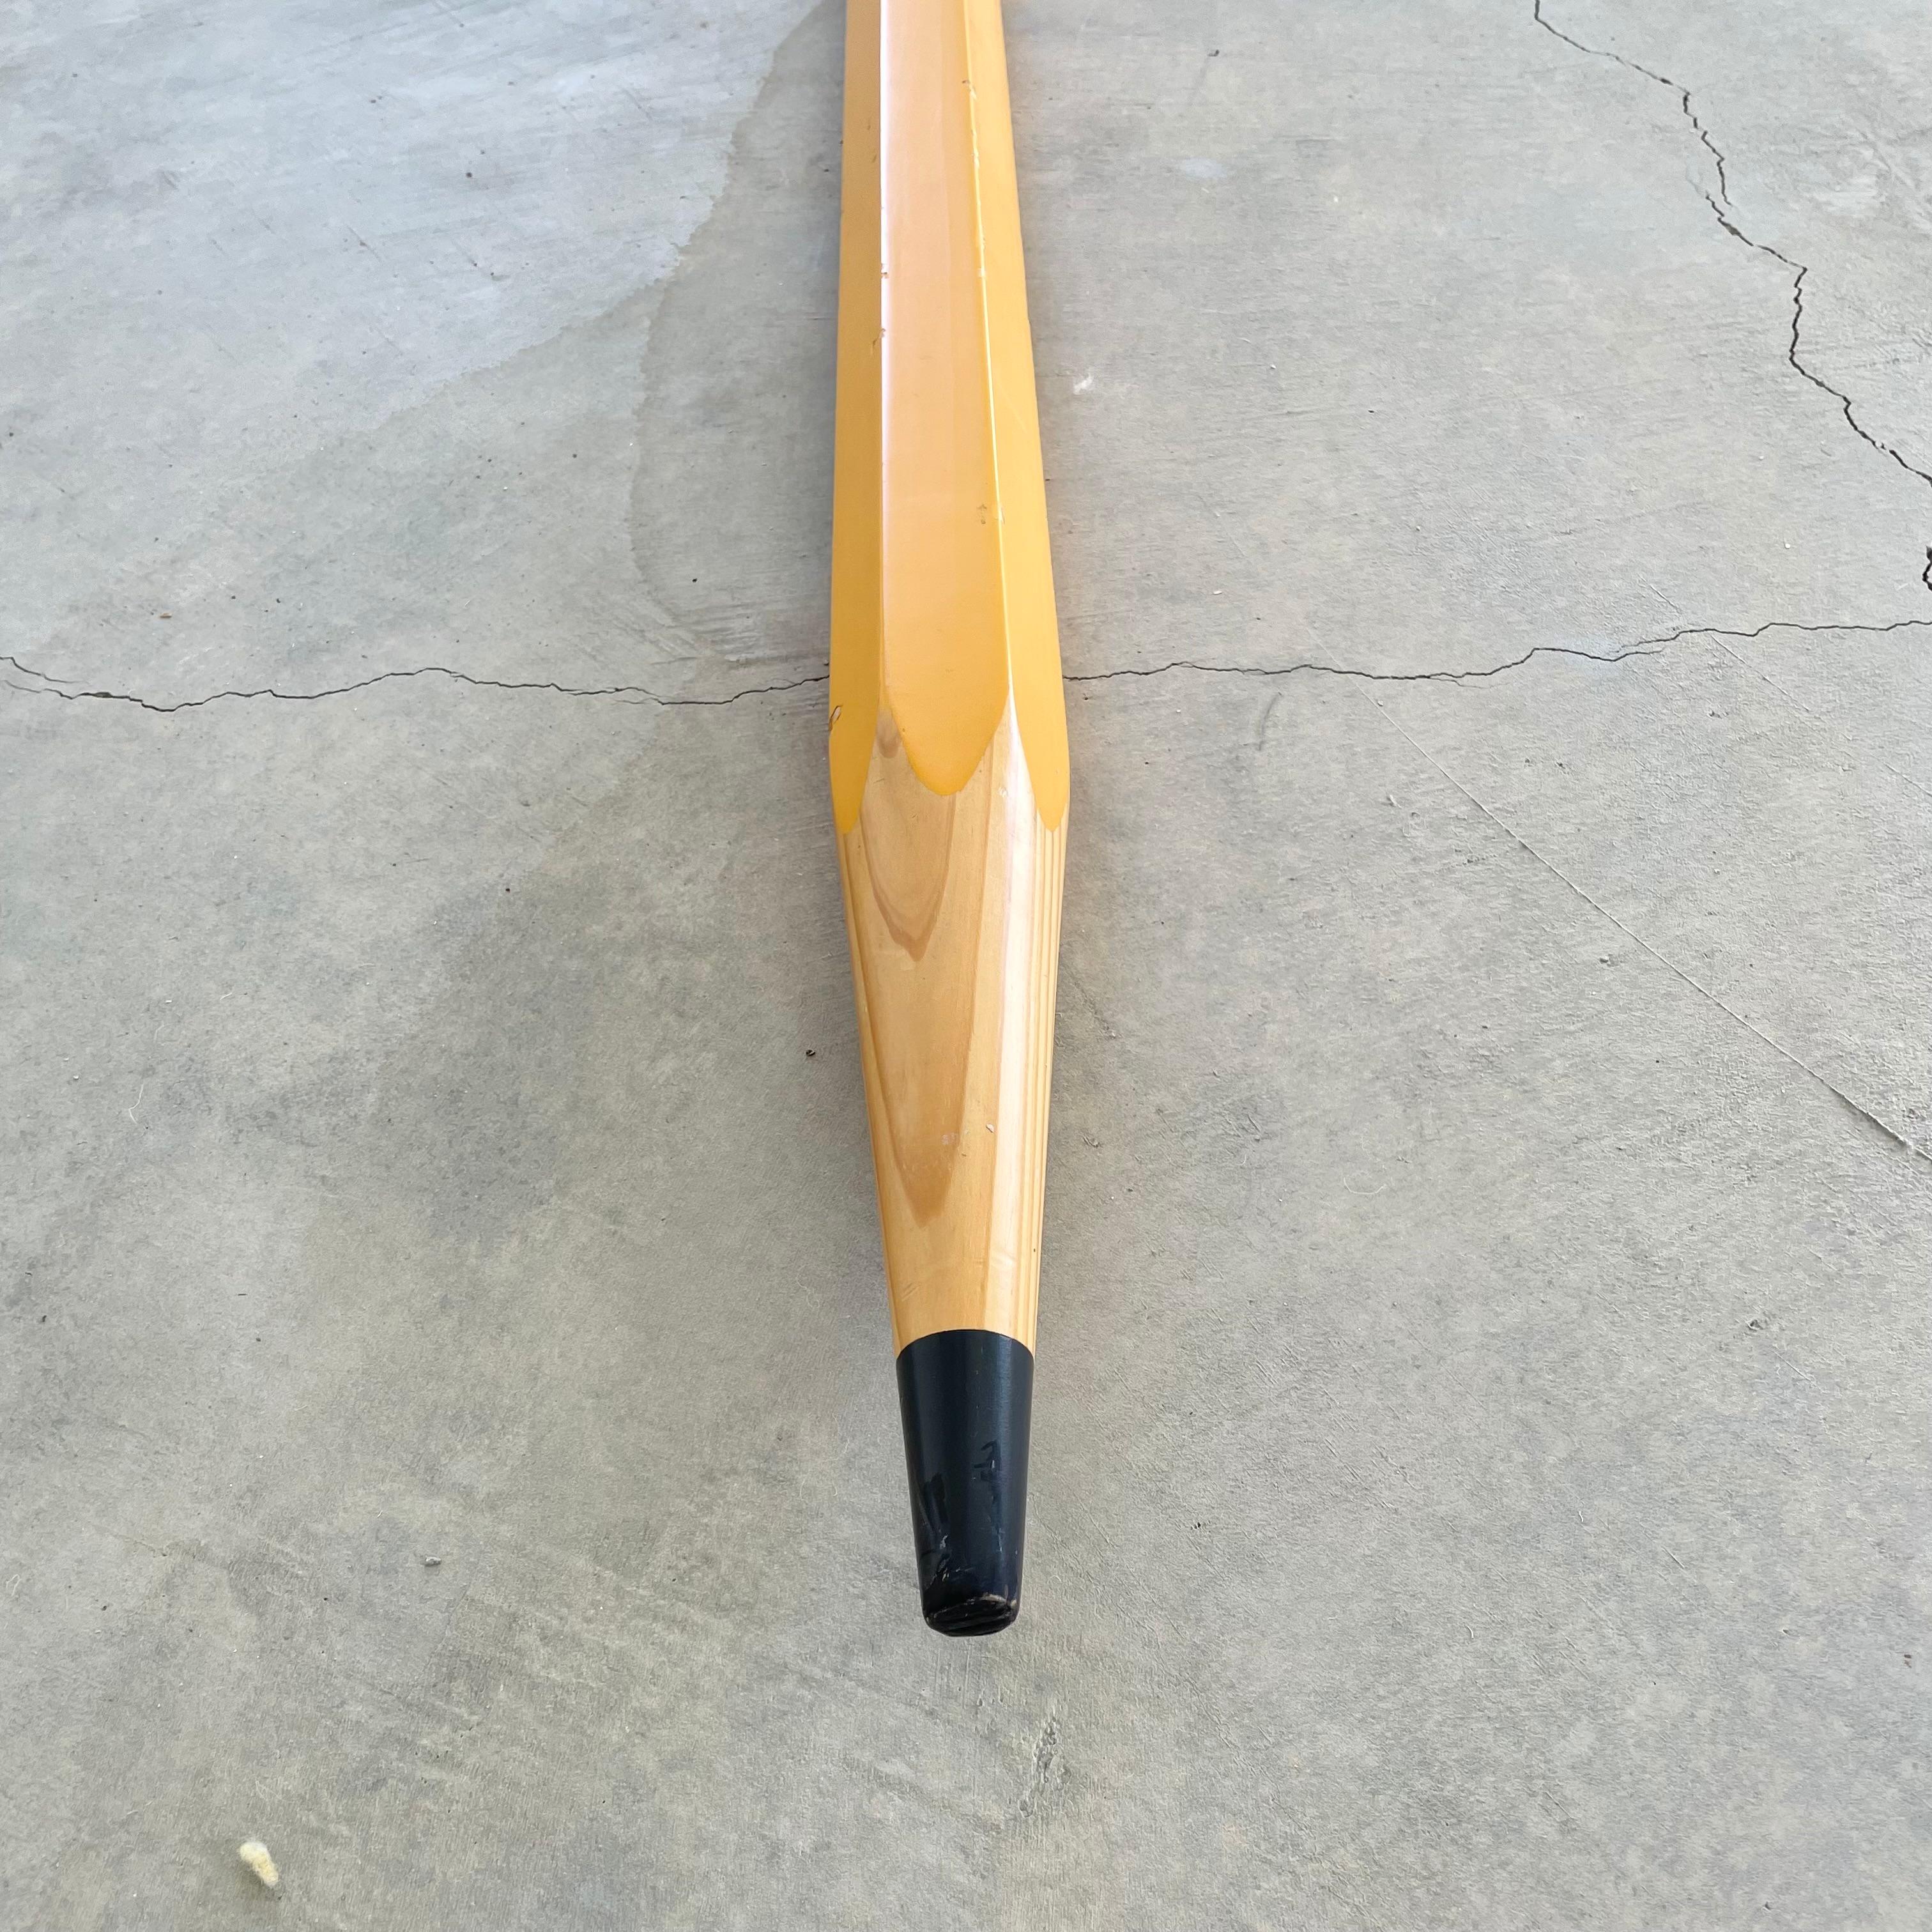 5 Foot Tall Pop Art Wood Pencil In Good Condition For Sale In Los Angeles, CA